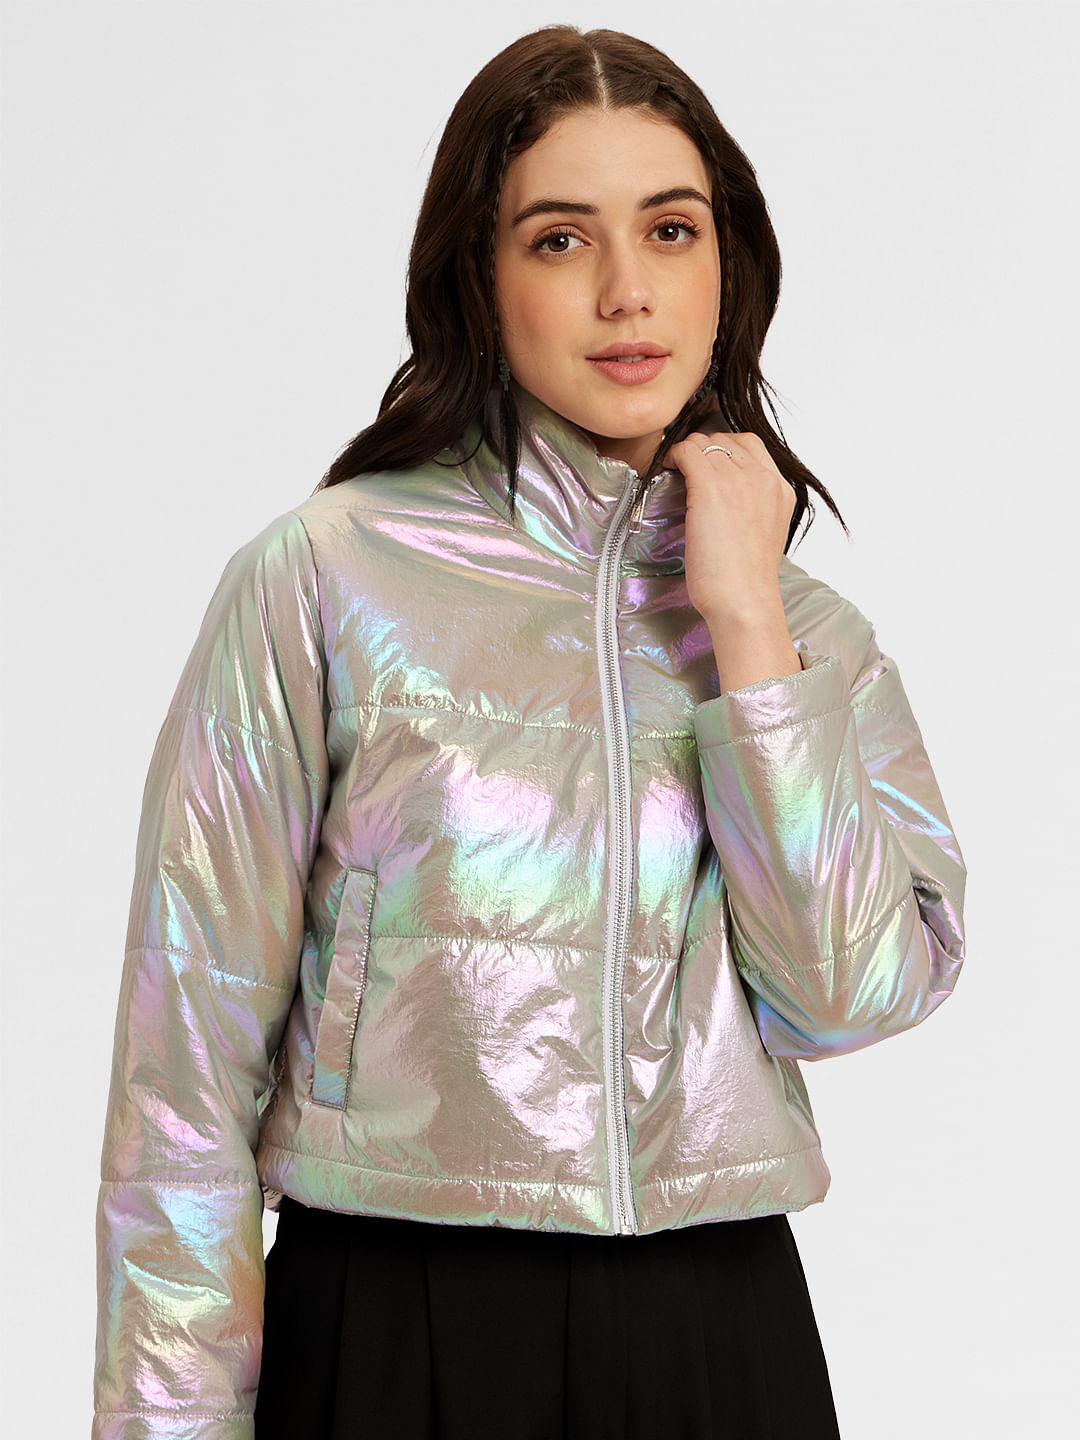 Buy Official Solids: Shiny Metal Women Jackets Online